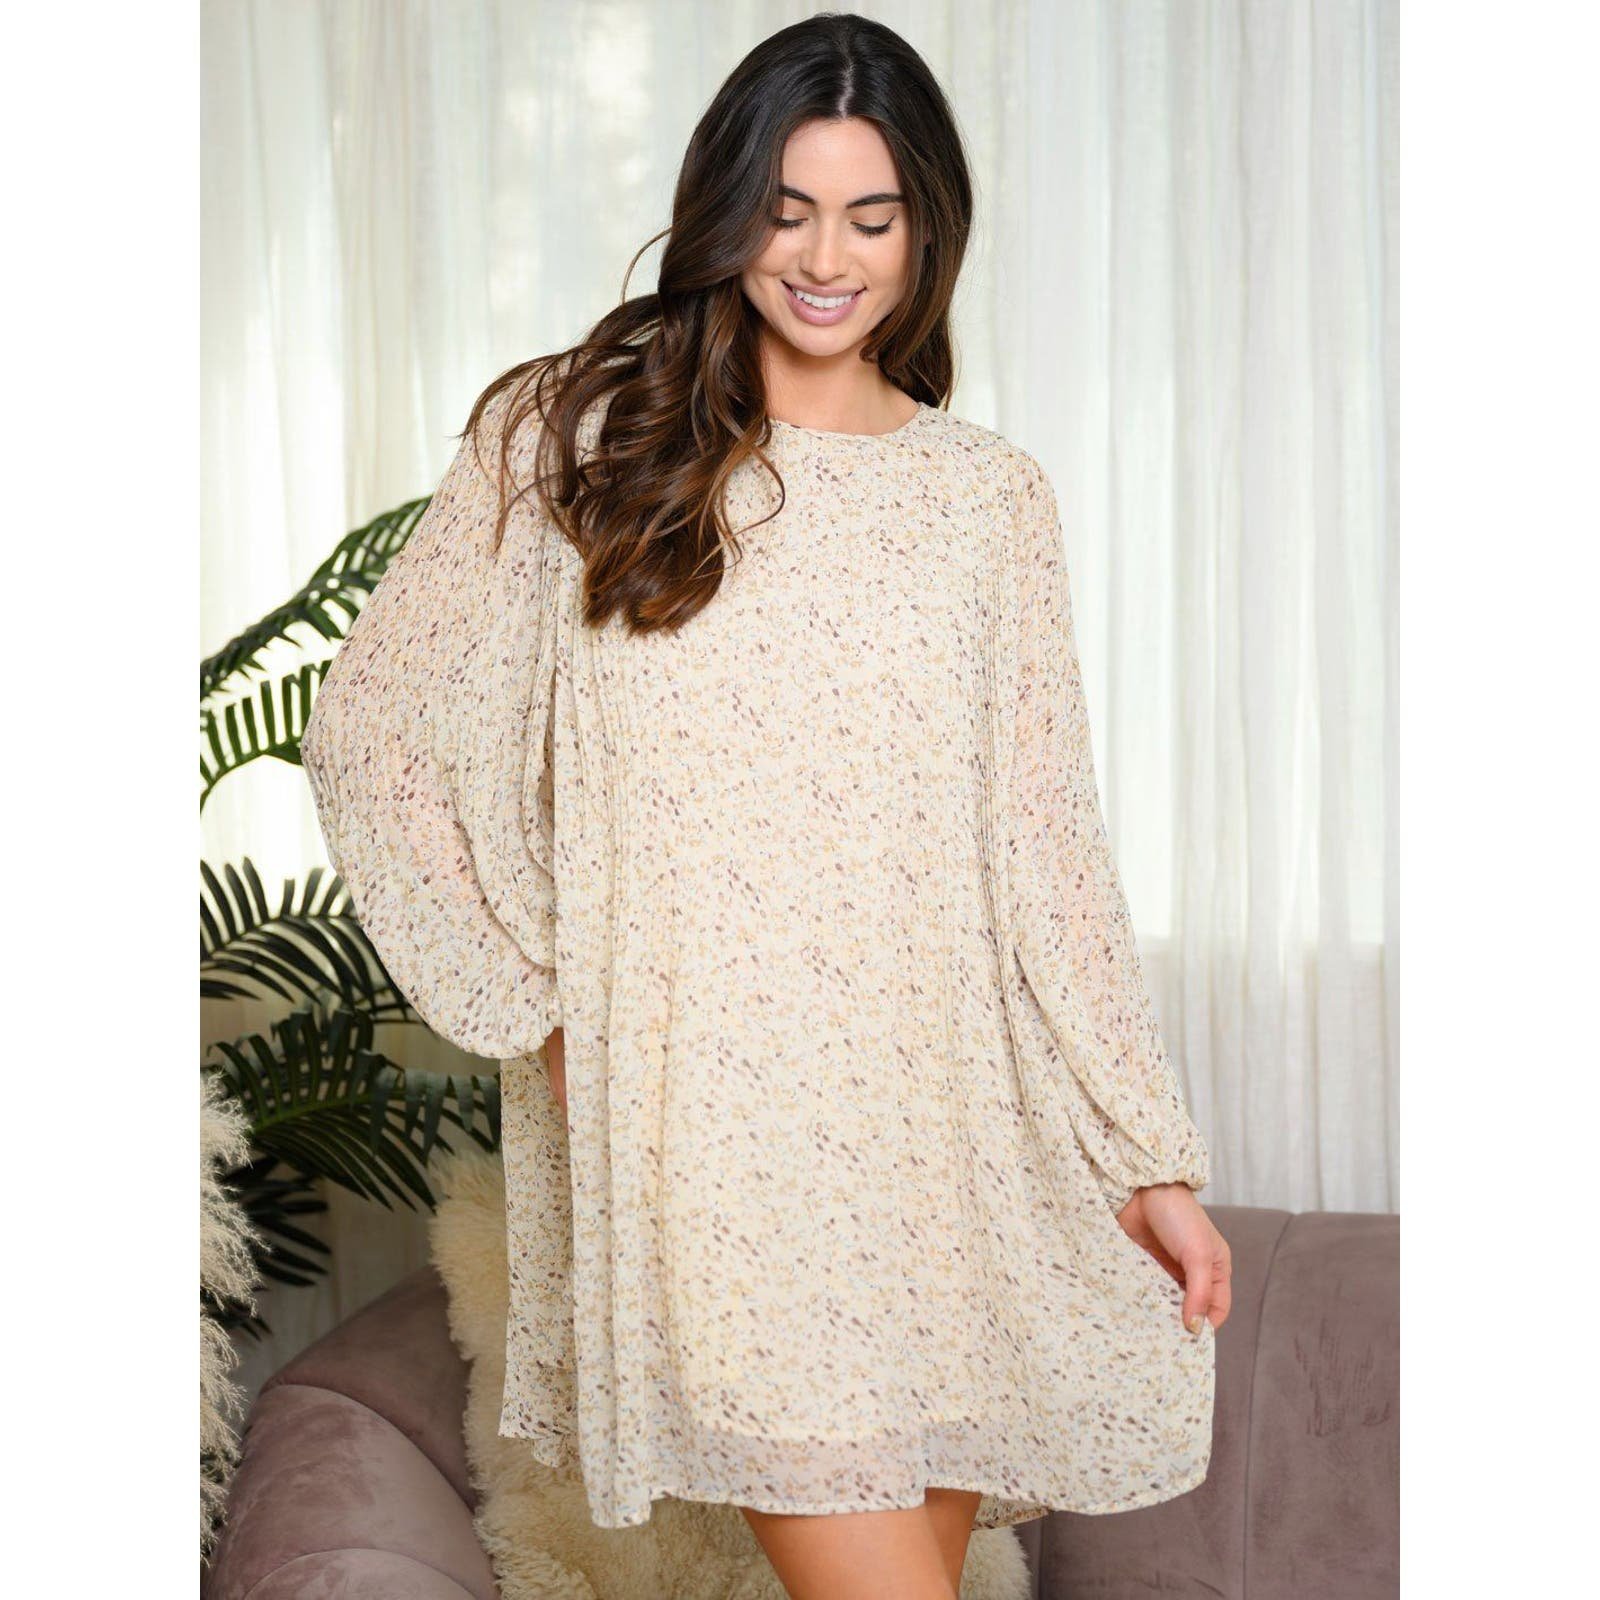 high discount Cream Long Sleeve Floral Tunic Dress M lIngLMF91 Cool